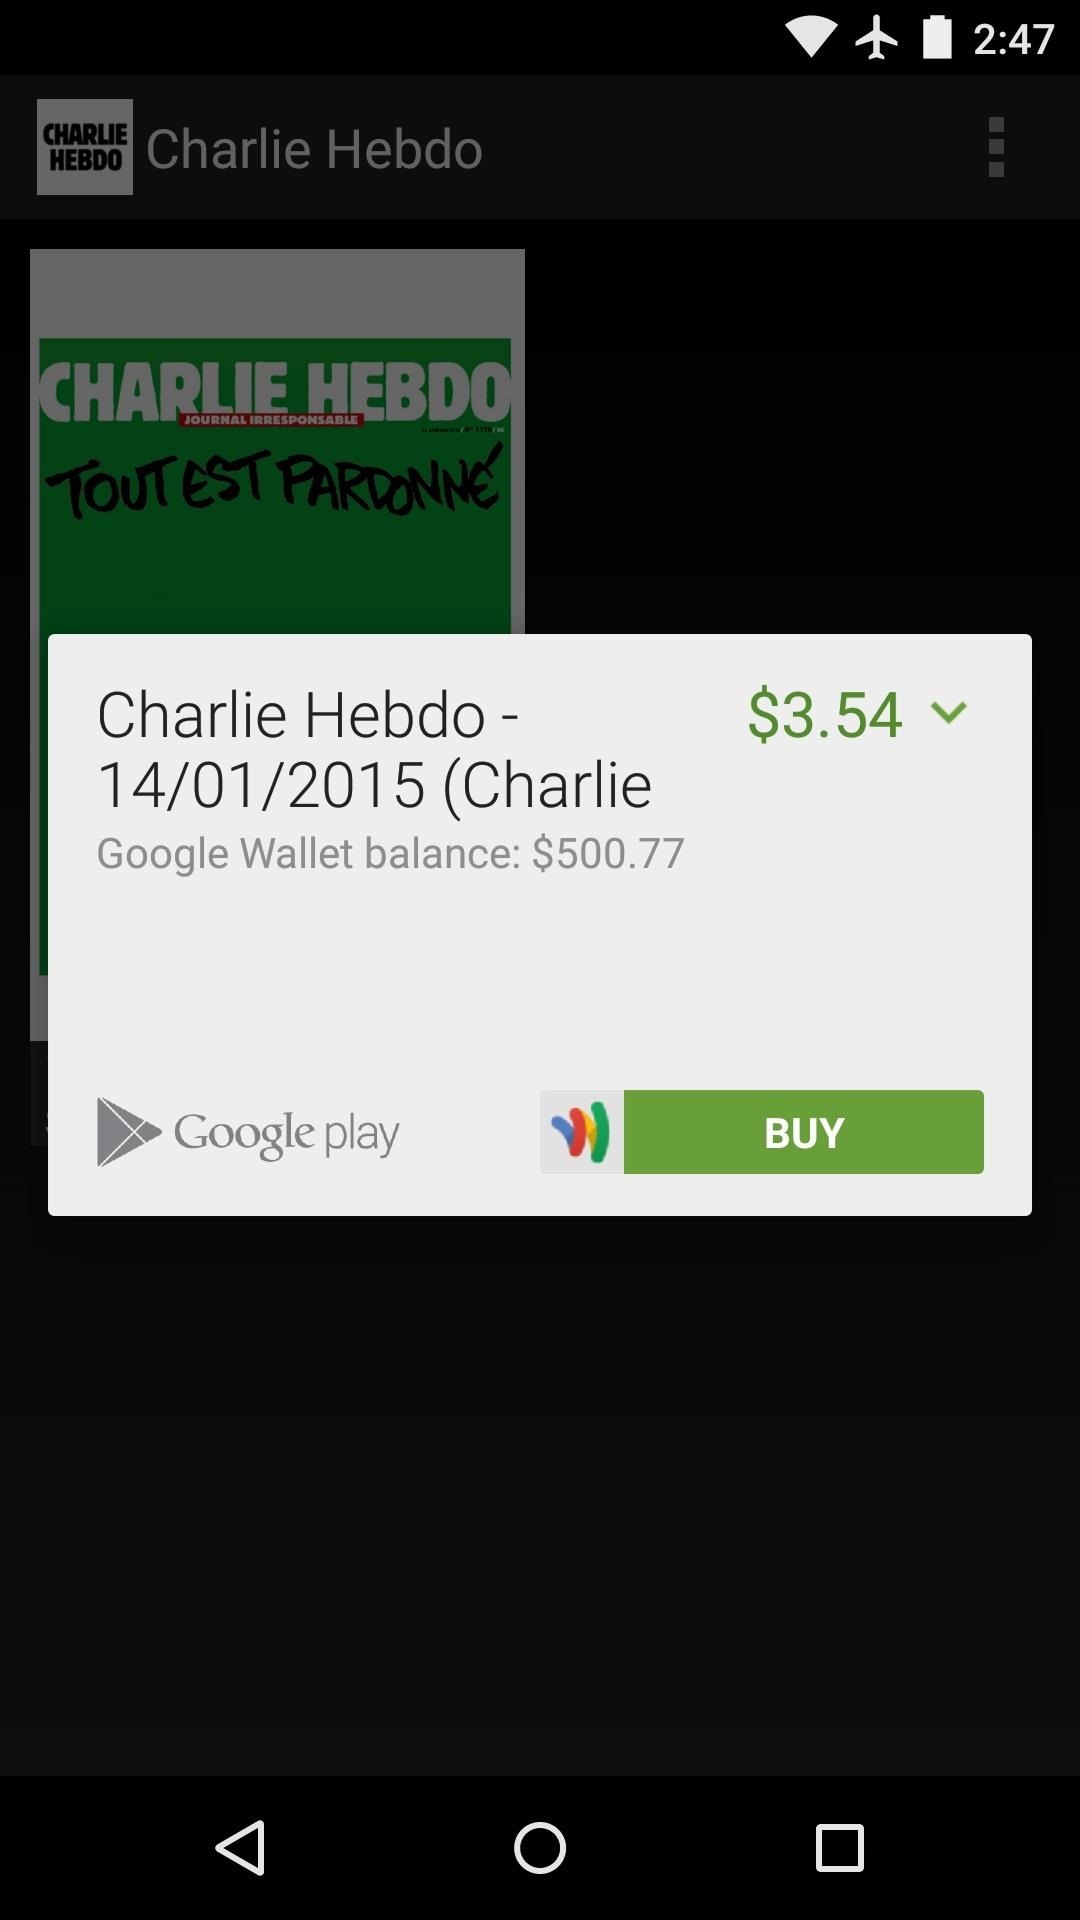 Charlie Hebdo Releases Mobile App for Android, iOS, & Windows